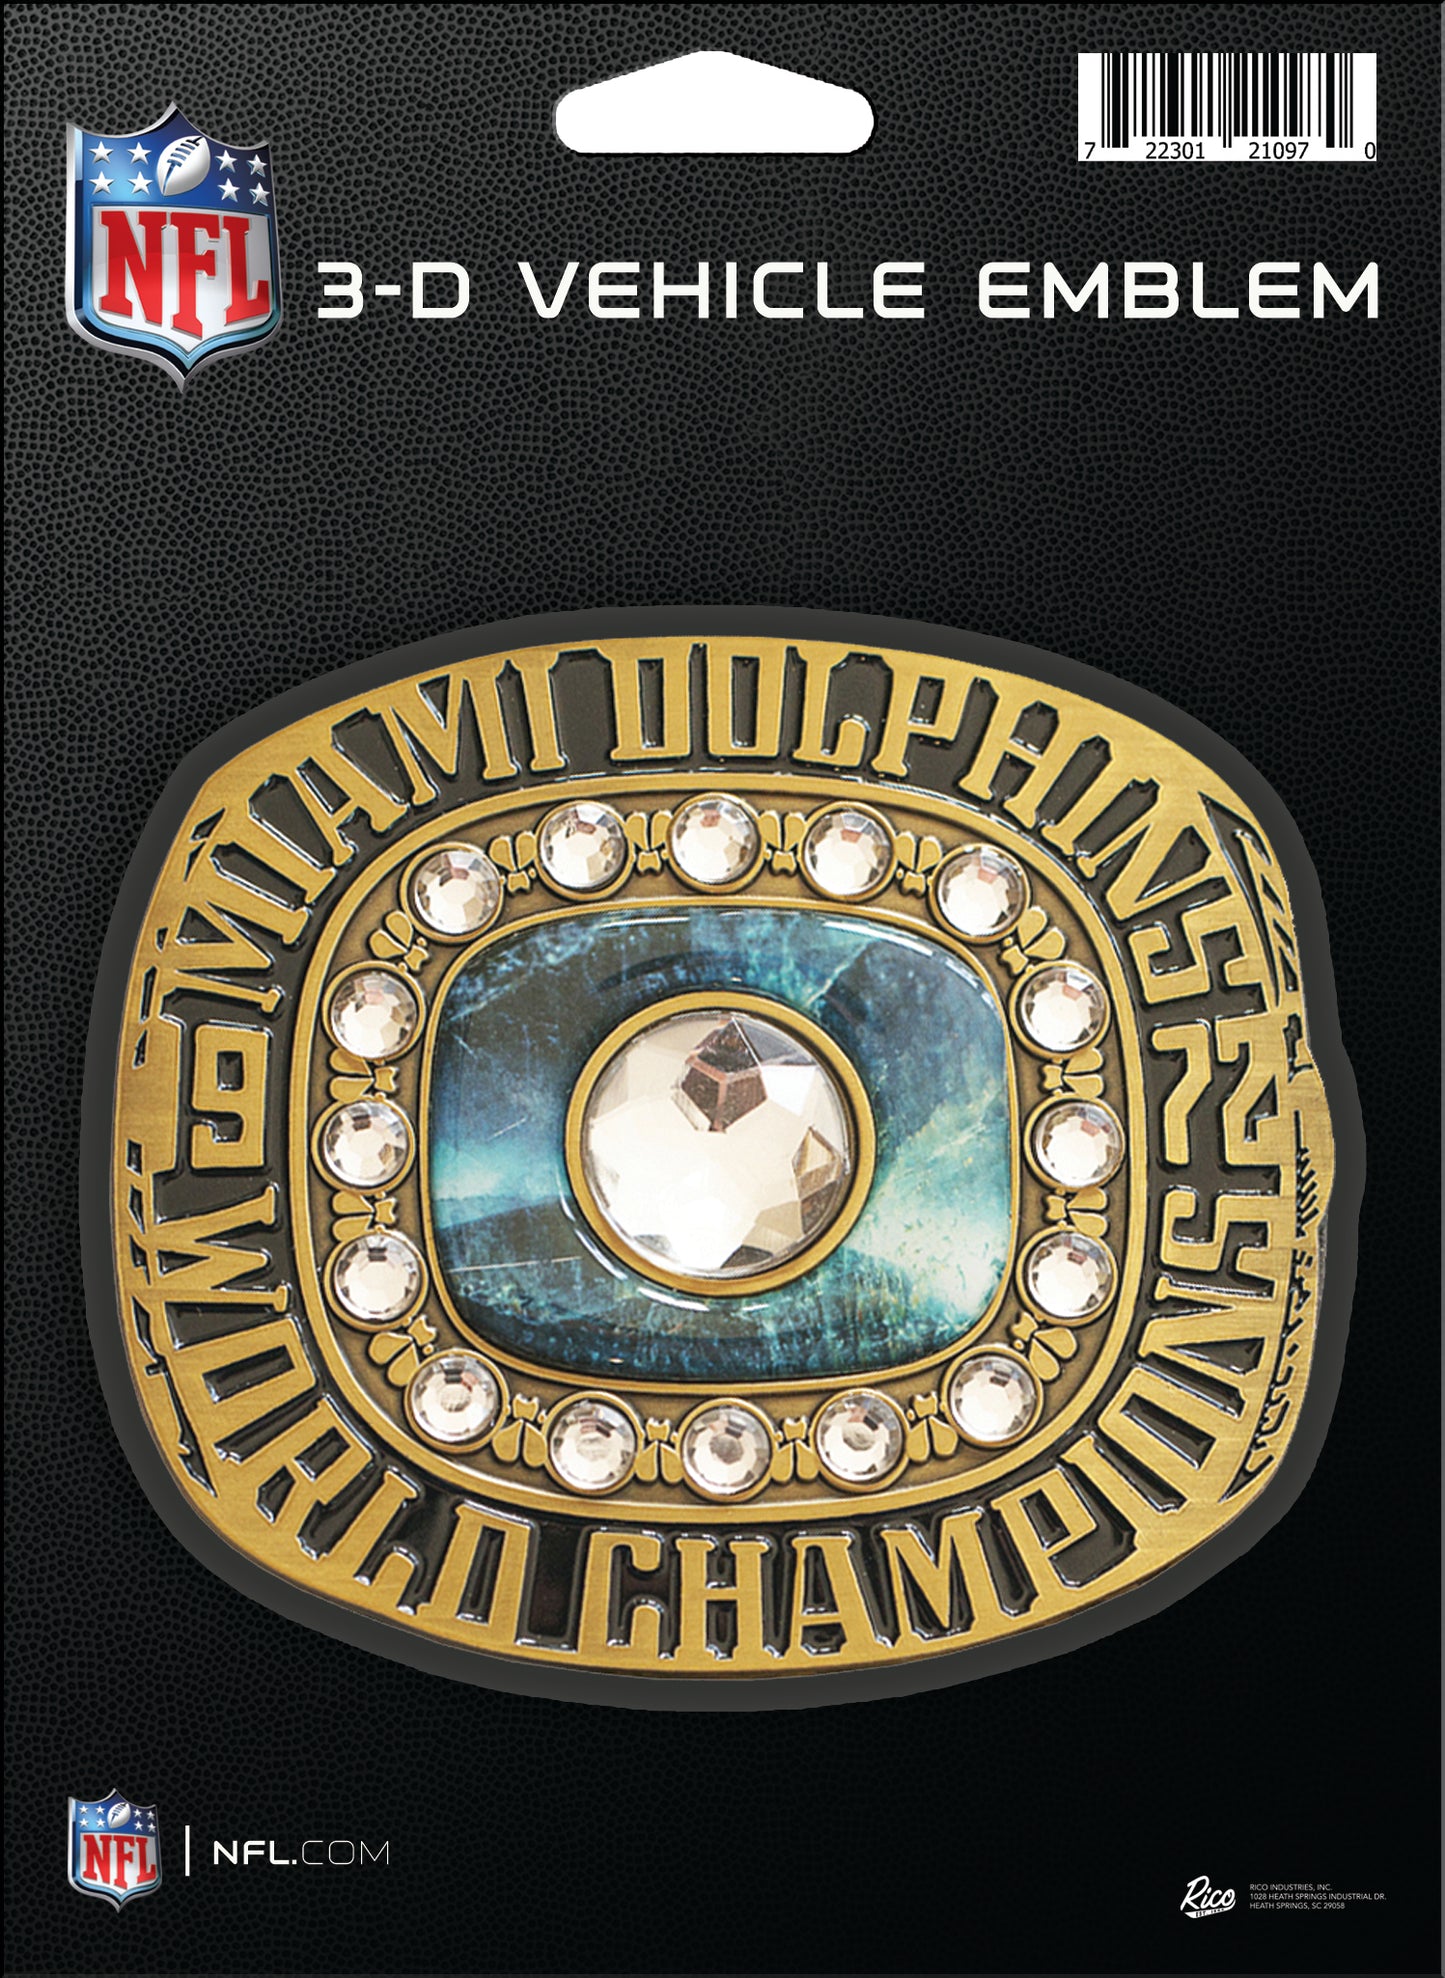 1972 dolphins super bowl ring for sale